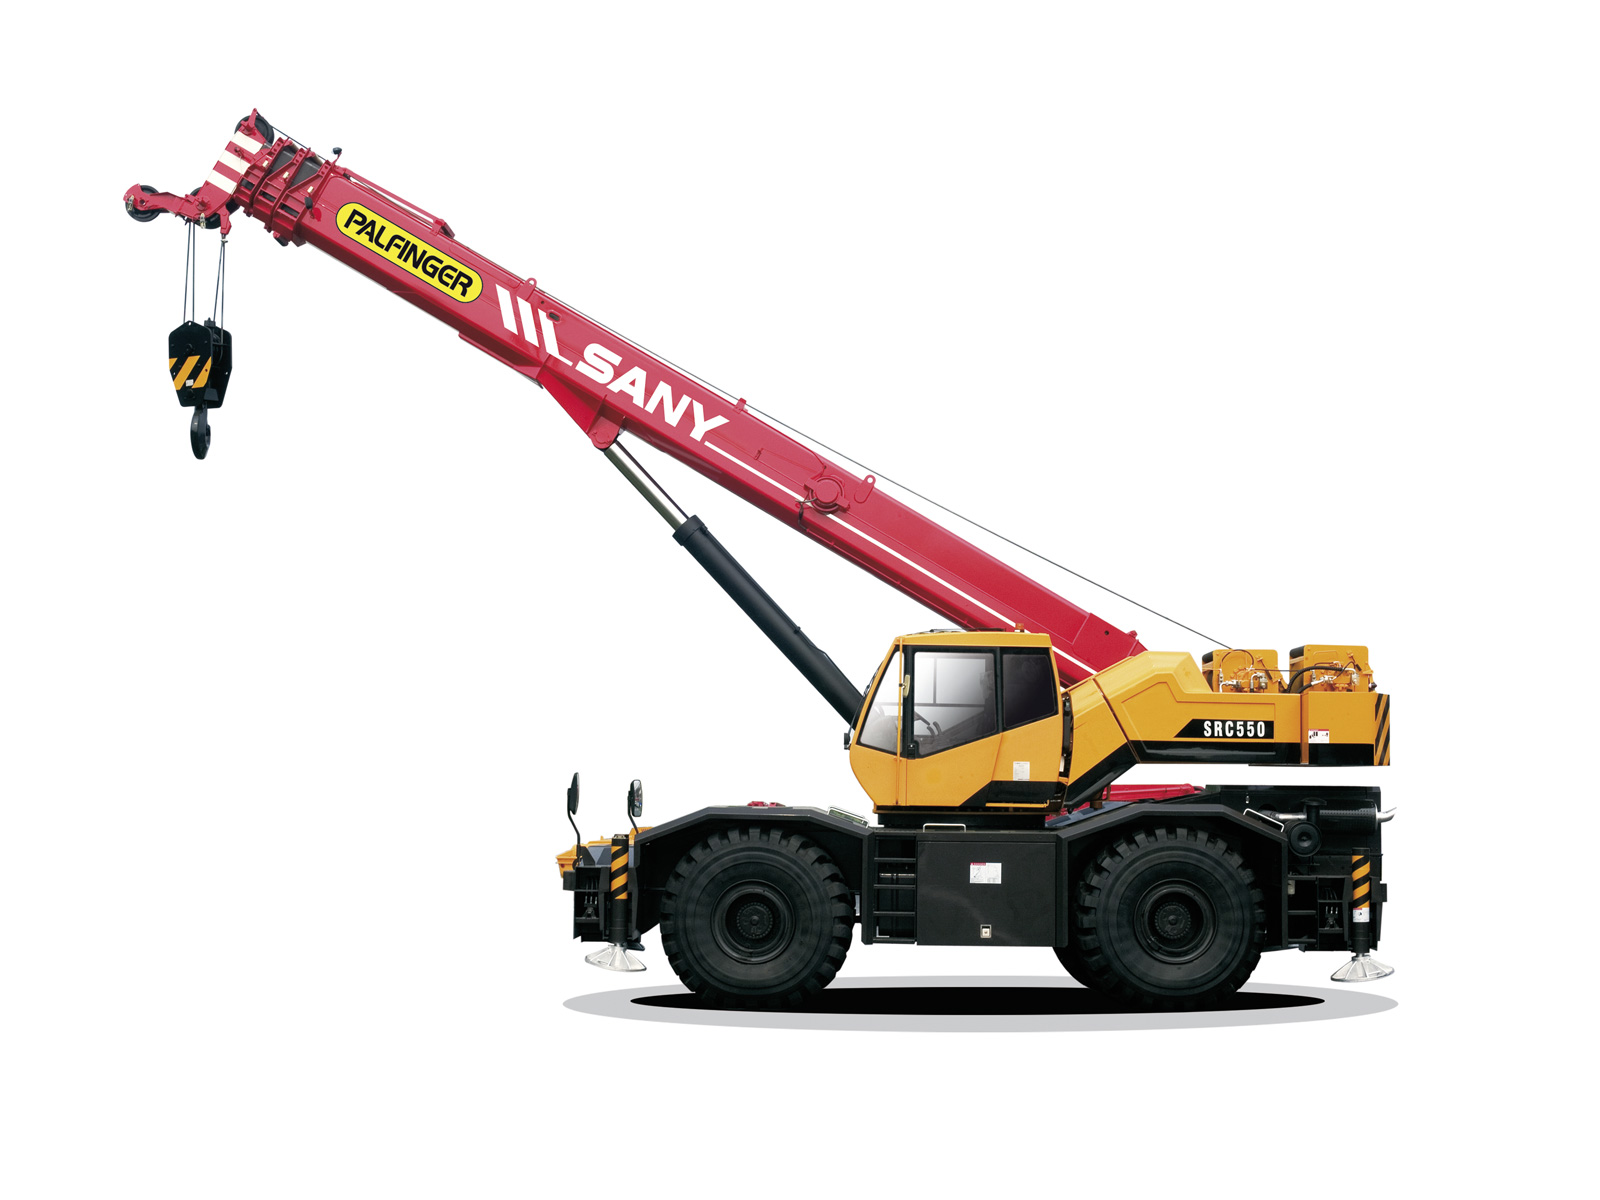 Rough Terrain Crane Rentals And Leases | KWIPPED